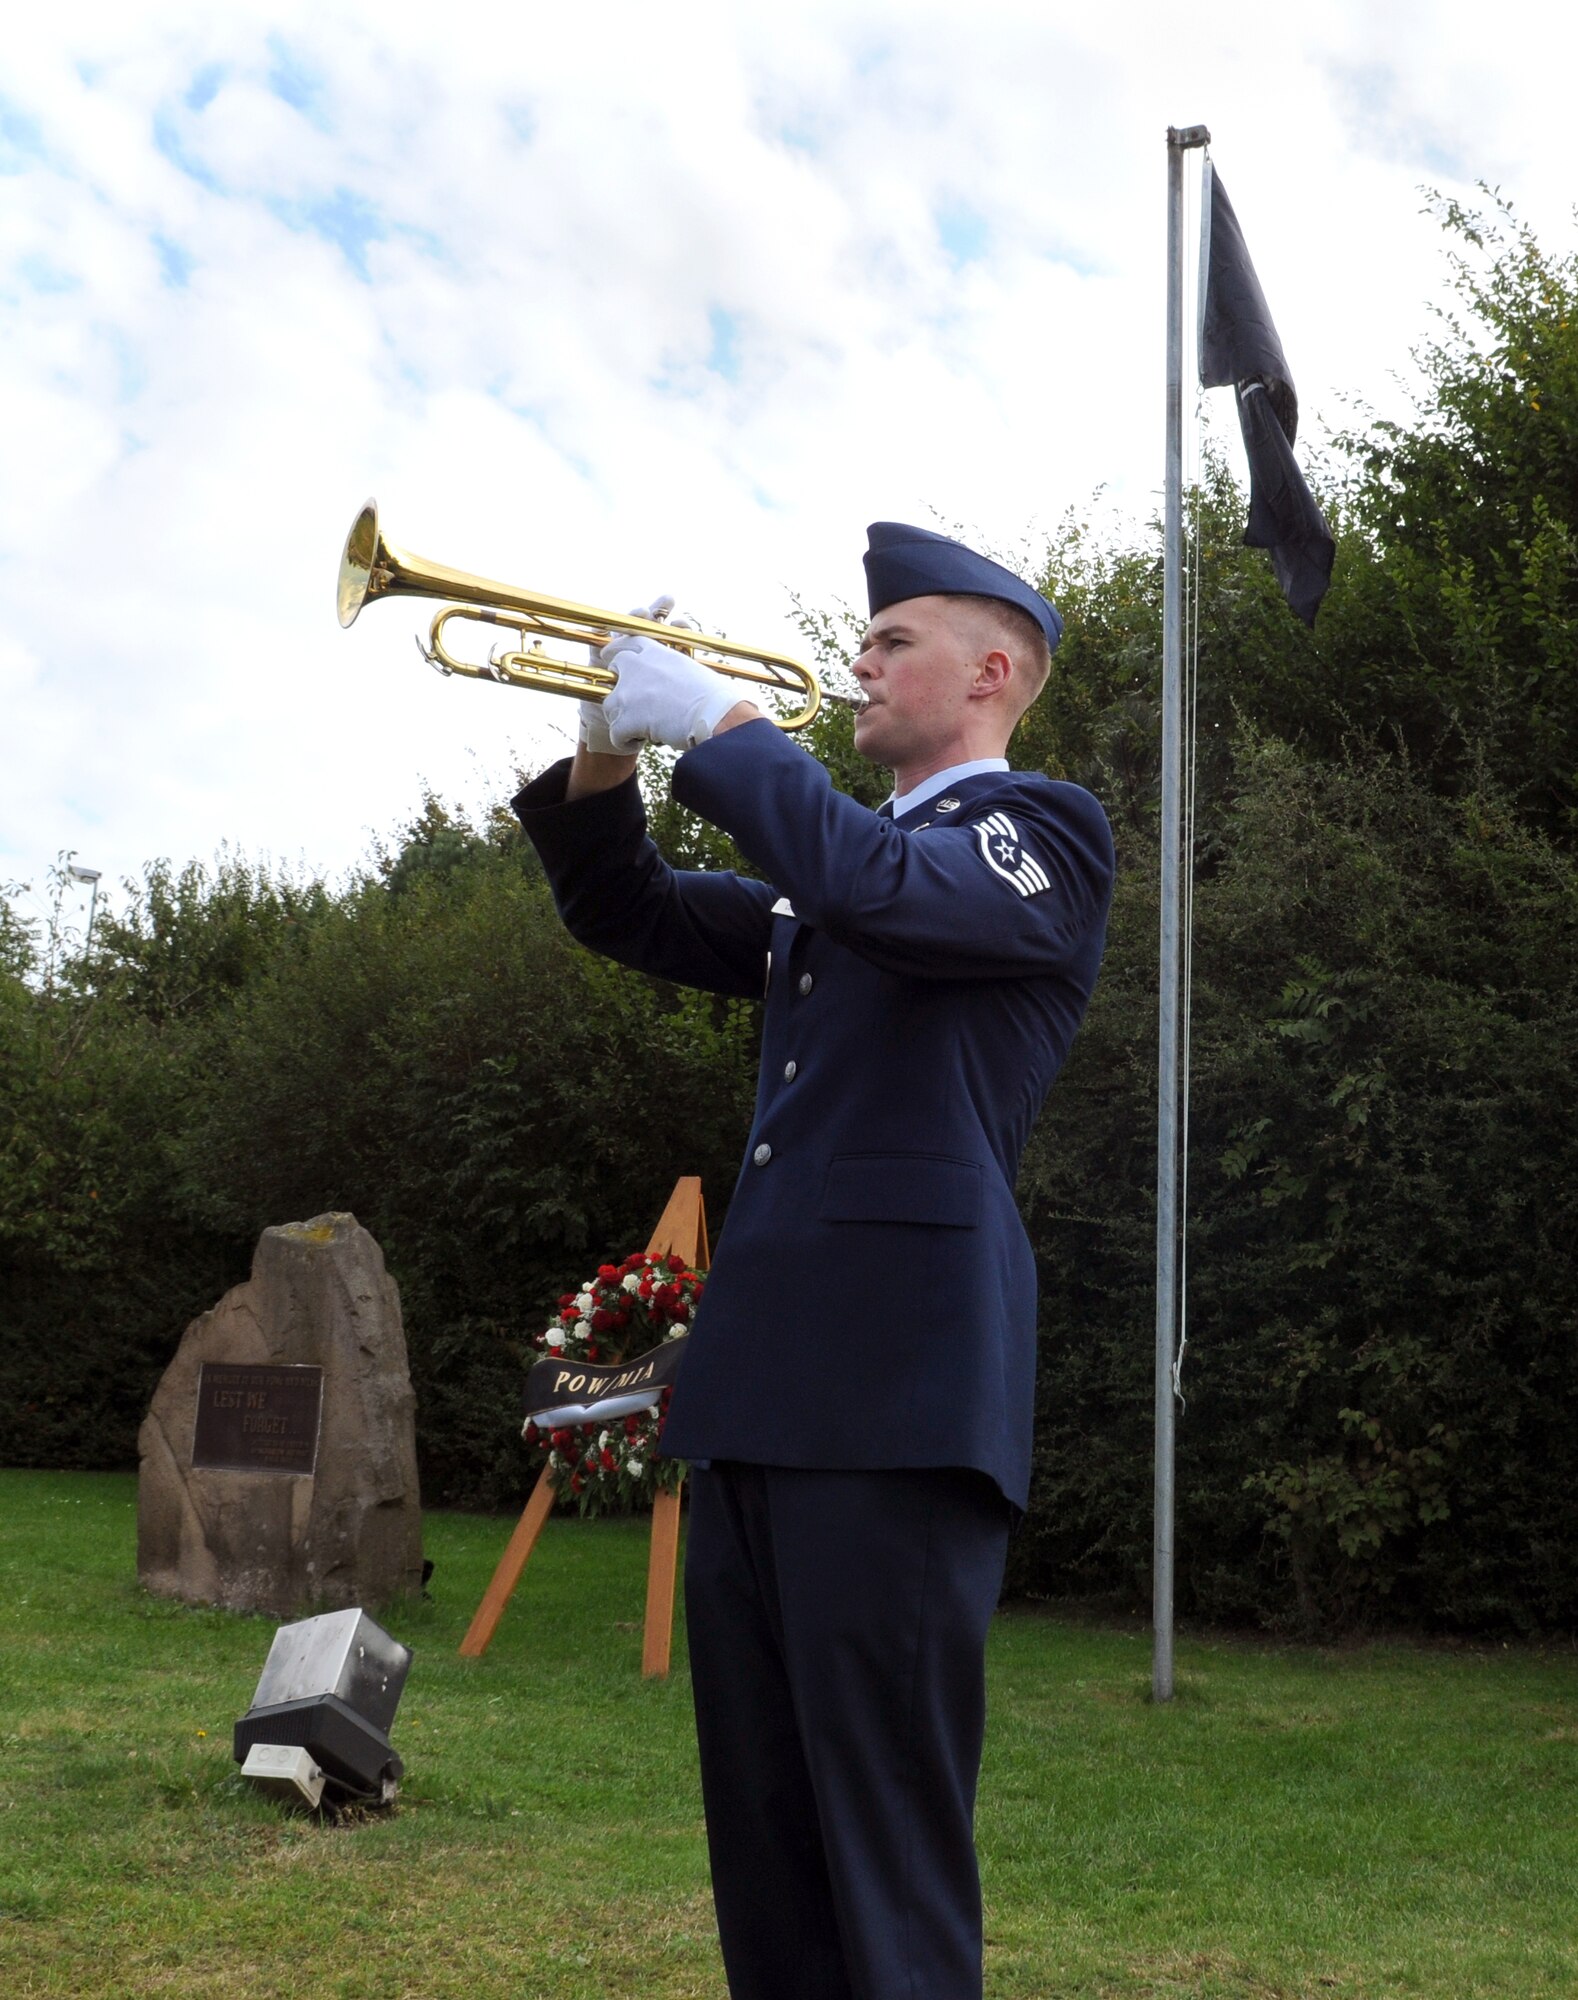 SPANGDAHLEM AIR BASE, Germany -- Staff. Sgt. Nicholas Cooley, 52nd Force Support Squadron, plays taps during the POW/MIA ceremony at the Air Park Sept. 18. Taps is played during flag ceremonies and funerals to honor fallen U.S. servicemembers. (U.S. Air Force photo/Airman 1st Class Nathanael Callon)